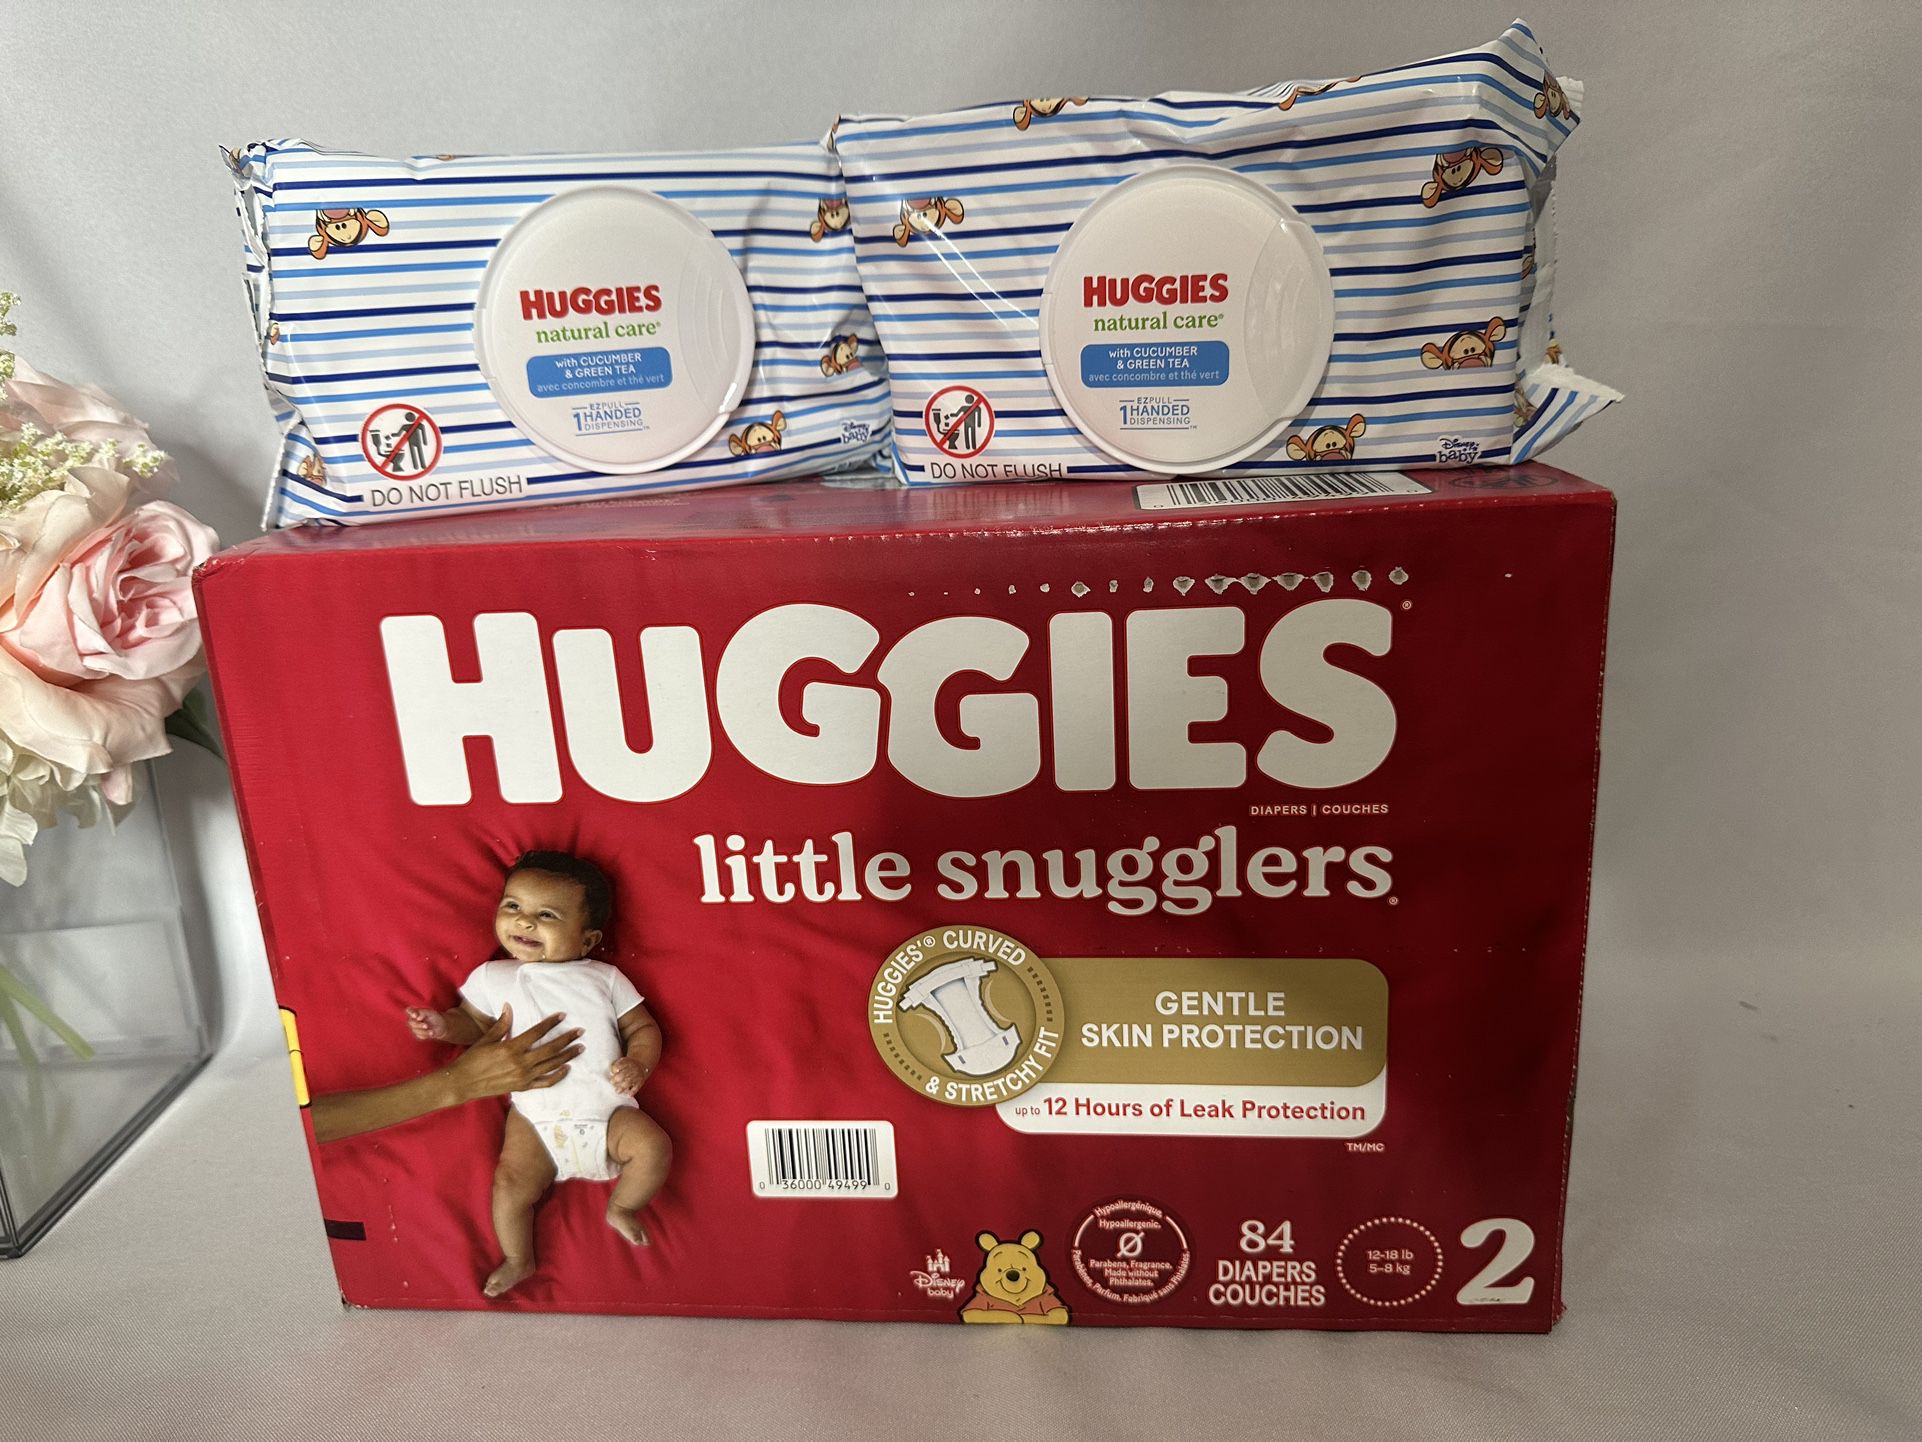 Huggies diapers size 2 + baby wipes $25 for all 